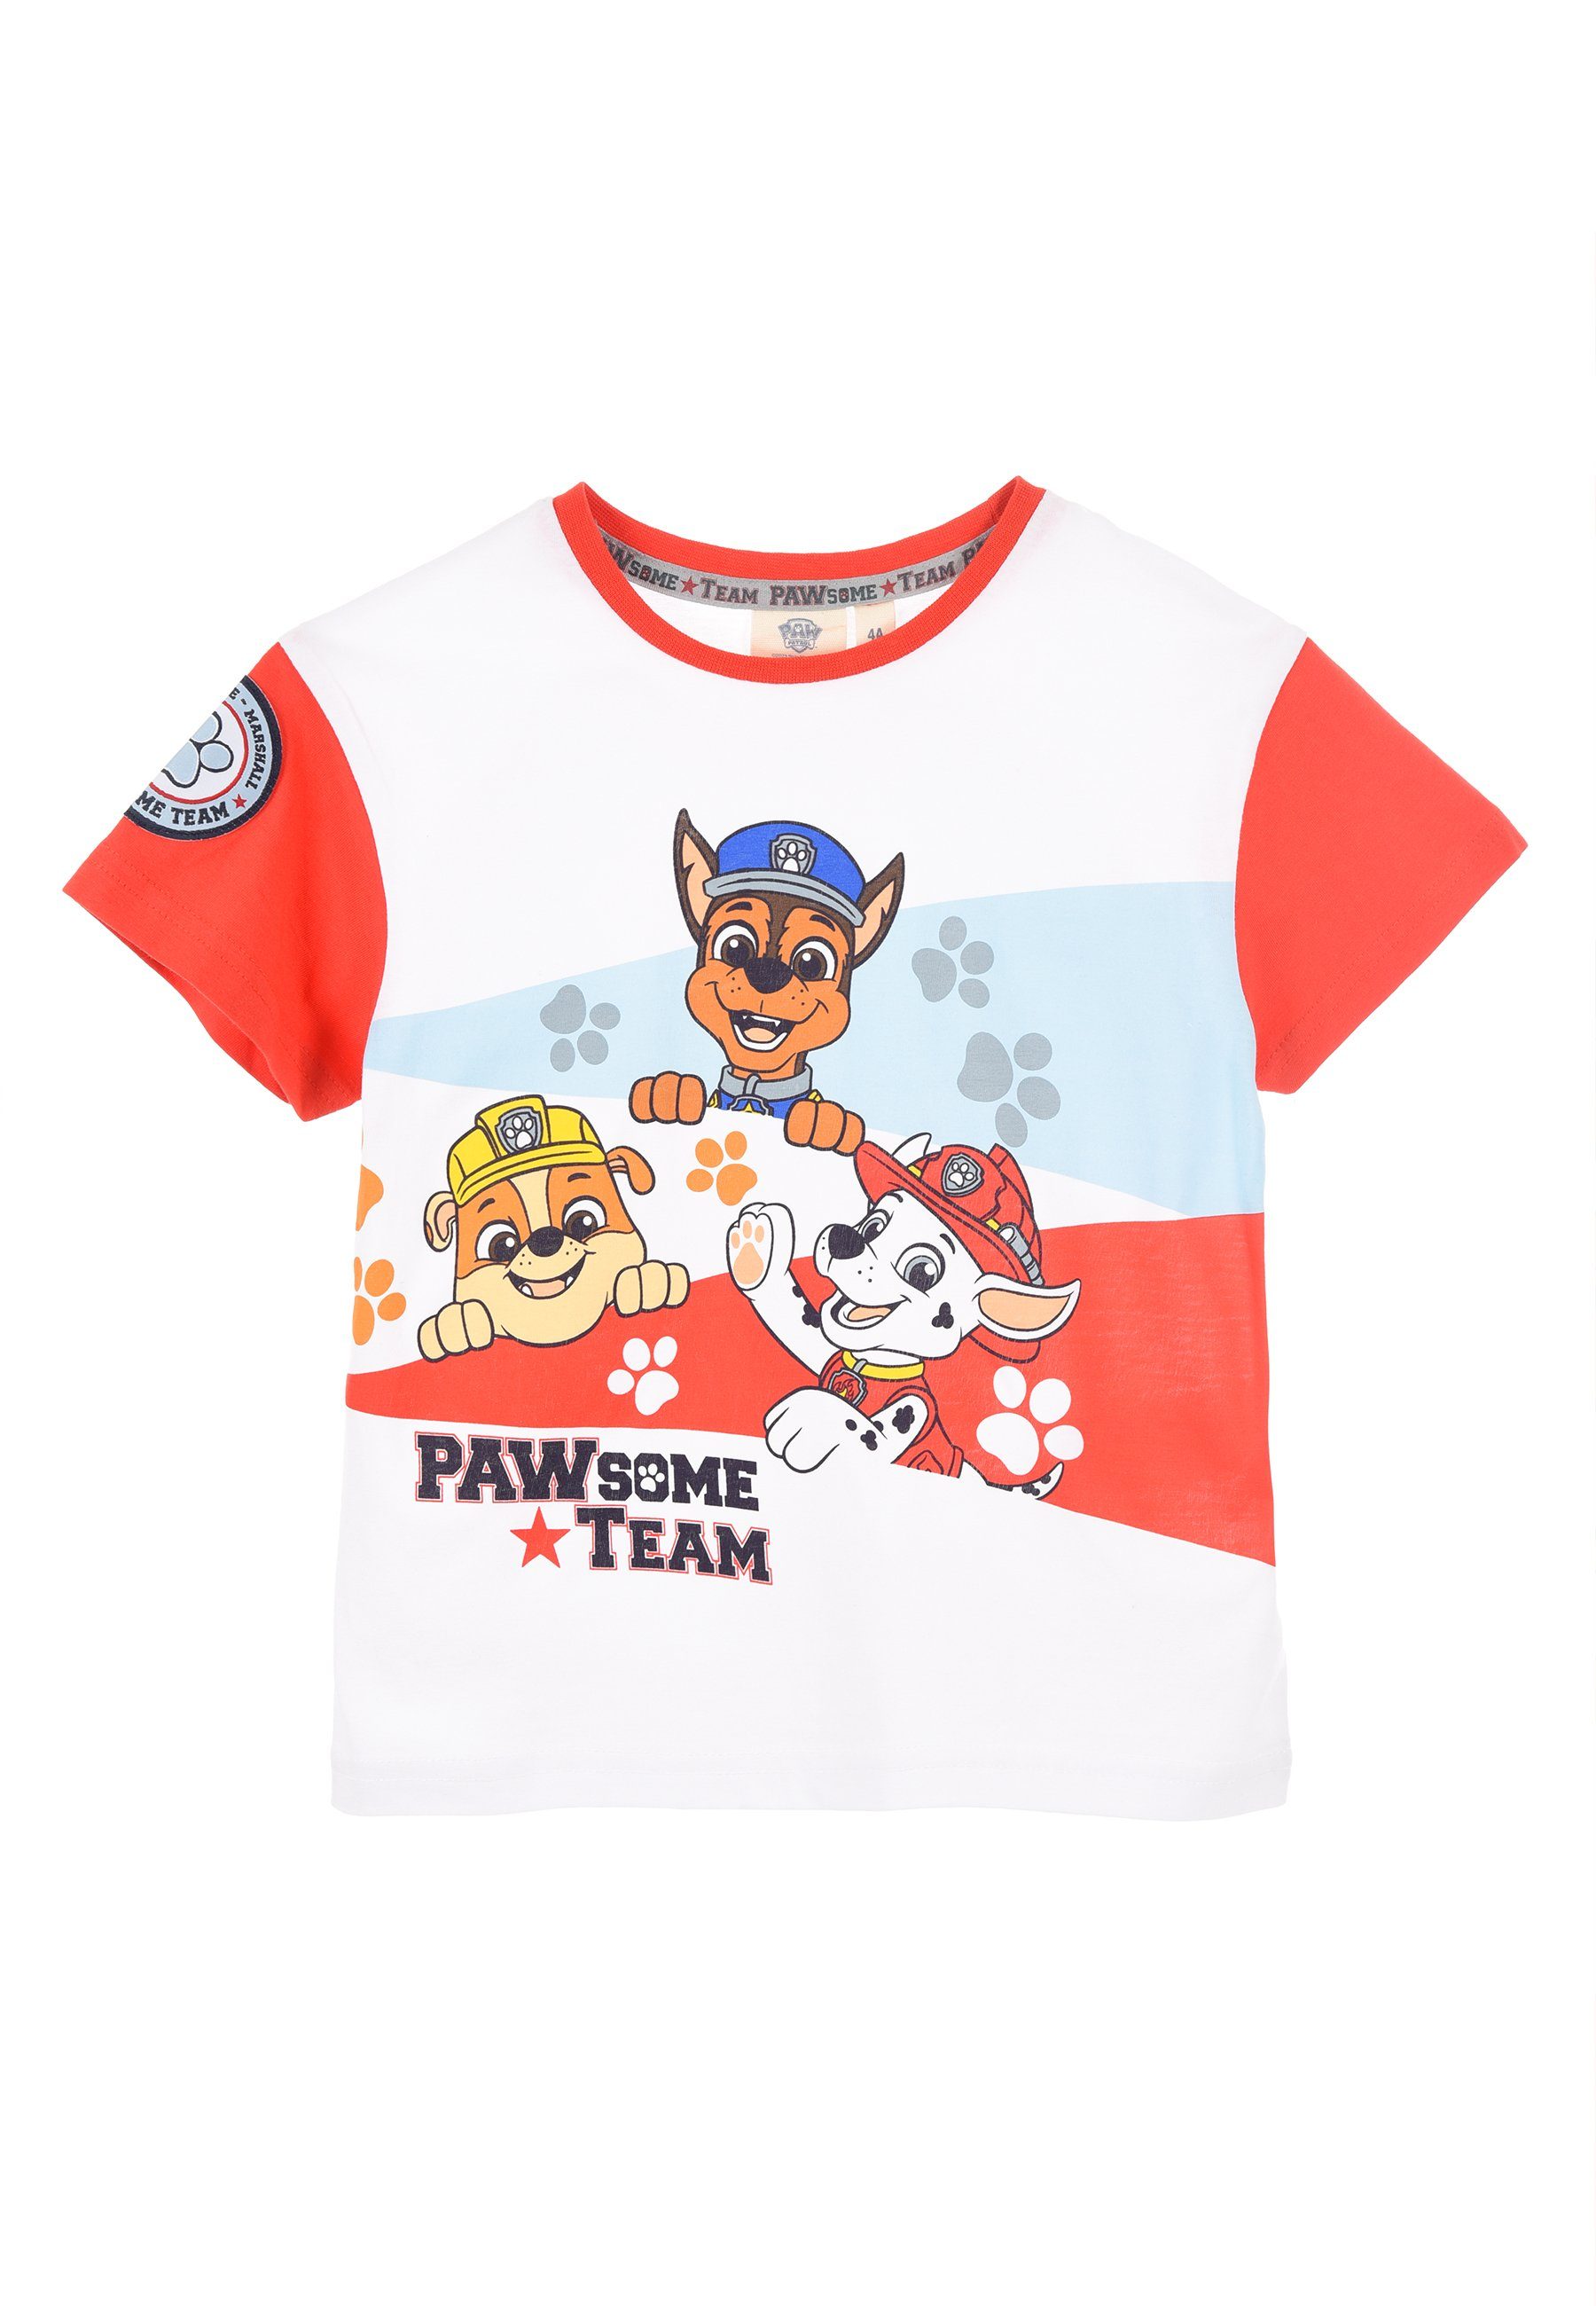 PAW PATROL T-Shirt Chase Marshall Rubble Kinder Jungen T-Shirt Oberteil Rot